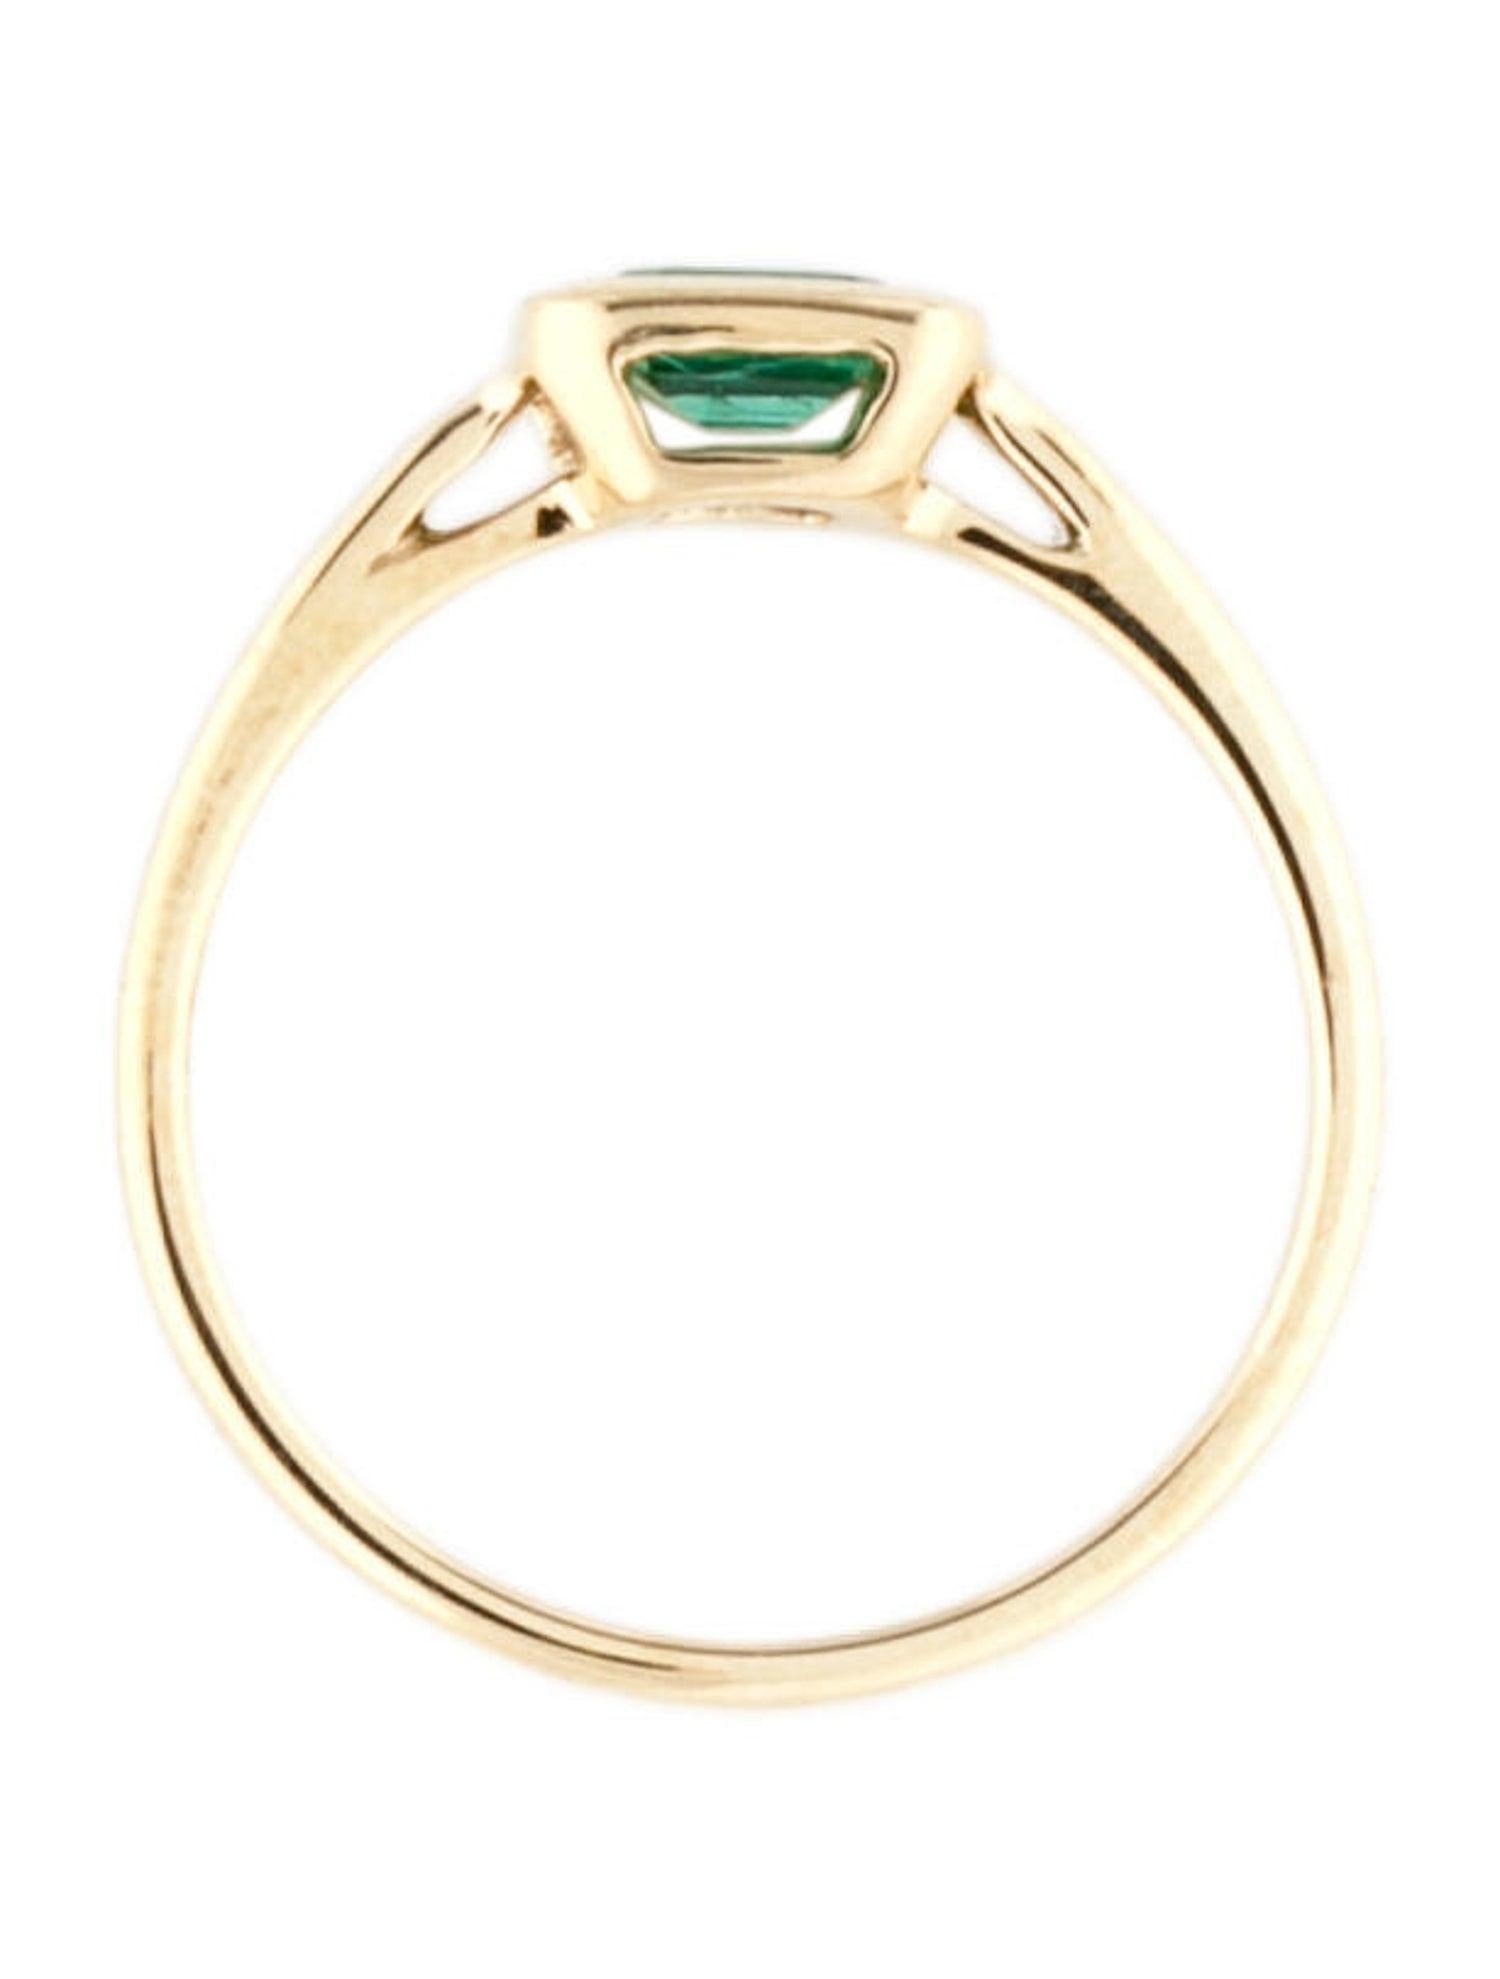 Women's 14k Gold & Emerald Ring 0.60 CTTW for Her, Emerald Cut Emerald for Ladies